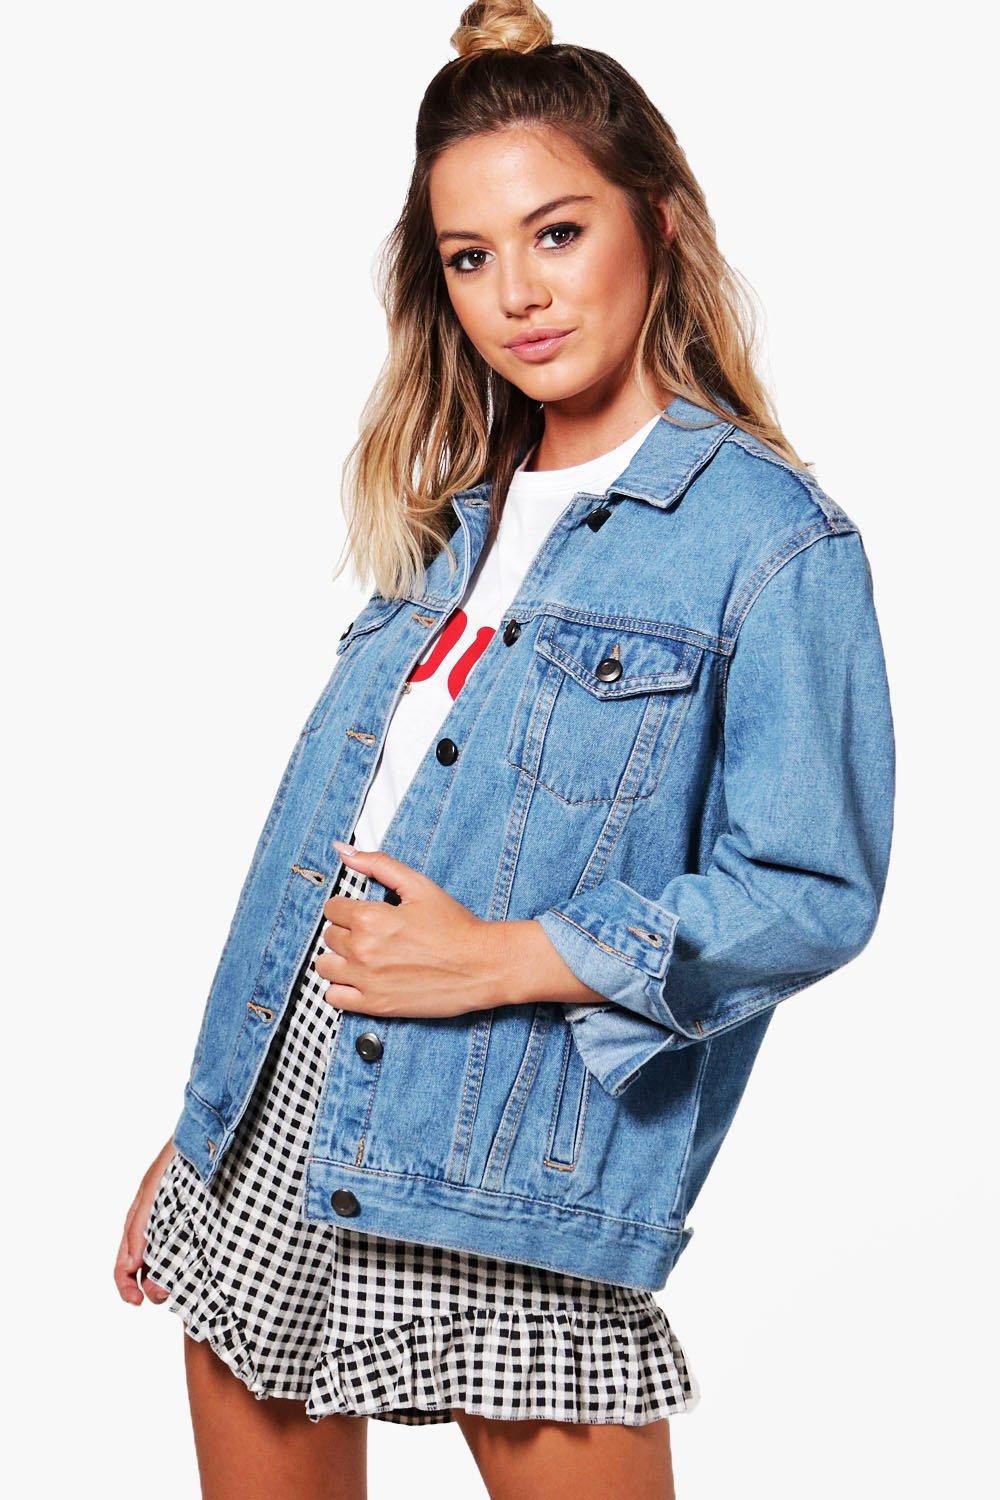 Stylish denim jacket for women, blue solid design with button closure, paired with a checkered mini skirt, creating a casual yet fashionable look.